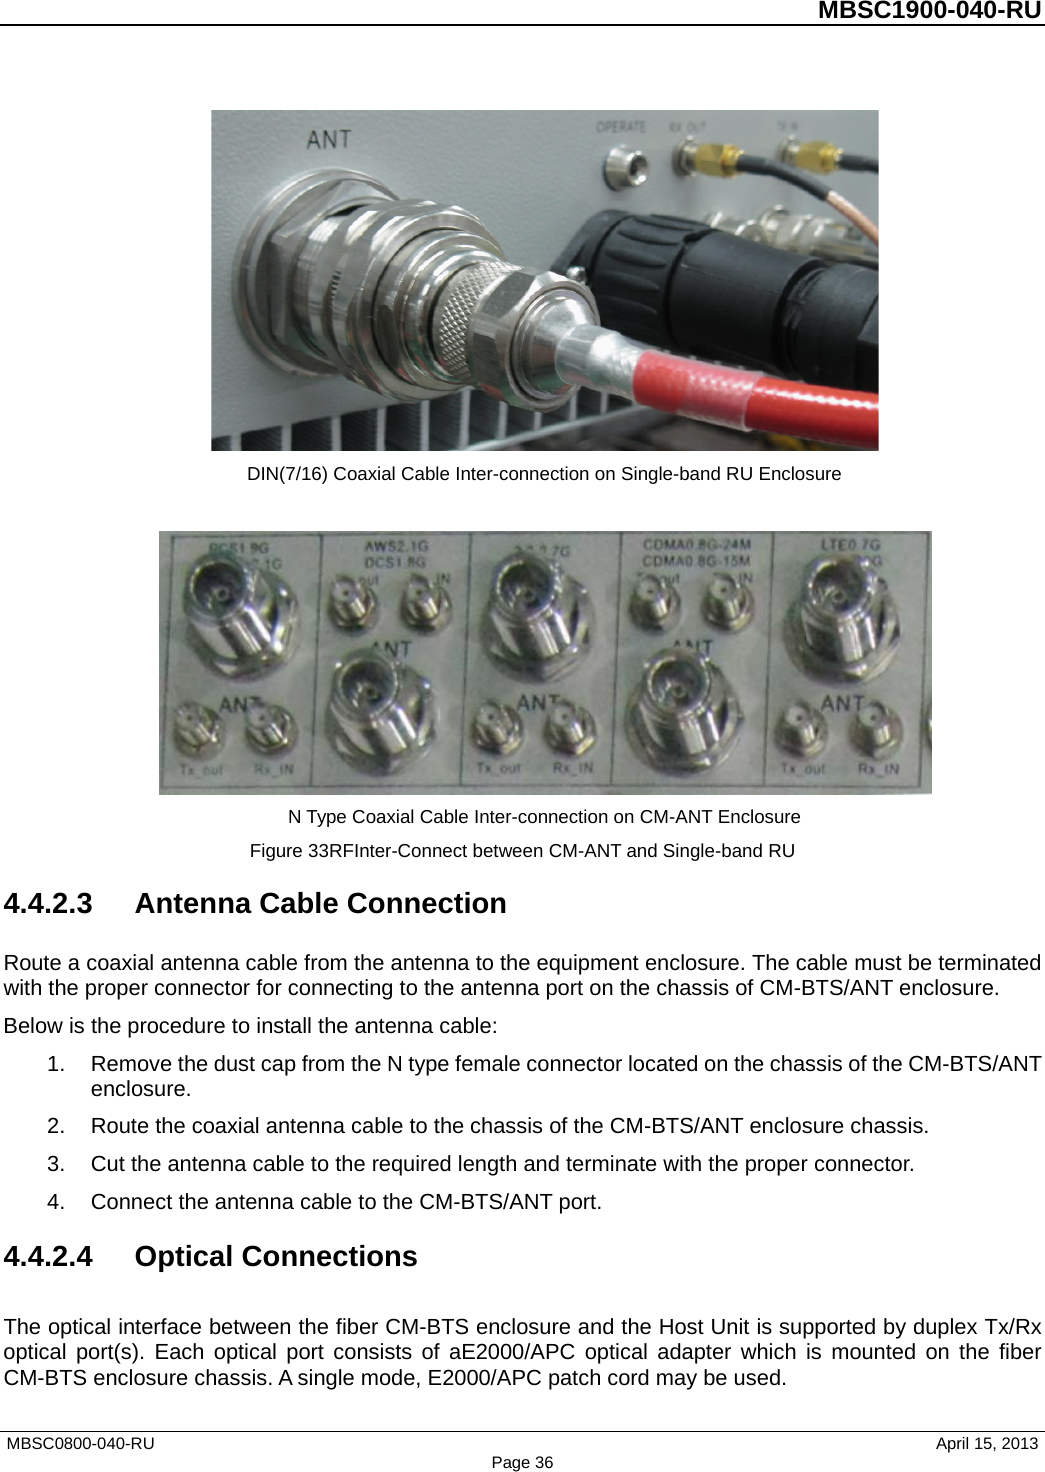          MBSC1900-040-RU    DIN(7/16) Coaxial Cable Inter-connection on Single-band RU Enclosure   N Type Coaxial Cable Inter-connection on CM-ANT Enclosure Figure 33RFInter-Connect between CM-ANT and Single-band RU 4.4.2.3 Antenna Cable Connection Route a coaxial antenna cable from the antenna to the equipment enclosure. The cable must be terminated with the proper connector for connecting to the antenna port on the chassis of CM-BTS/ANT enclosure. Below is the procedure to install the antenna cable: 1. Remove the dust cap from the N type female connector located on the chassis of the CM-BTS/ANT enclosure. 2. Route the coaxial antenna cable to the chassis of the CM-BTS/ANT enclosure chassis. 3. Cut the antenna cable to the required length and terminate with the proper connector. 4. Connect the antenna cable to the CM-BTS/ANT port. 4.4.2.4 Optical Connections The optical interface between the fiber CM-BTS enclosure and the Host Unit is supported by duplex Tx/Rx optical port(s). Each optical port consists of aE2000/APC optical adapter which is mounted on the fiber CM-BTS enclosure chassis. A single mode, E2000/APC patch cord may be used. MBSC0800-040-RU                                      April 15, 2013 Page 36 